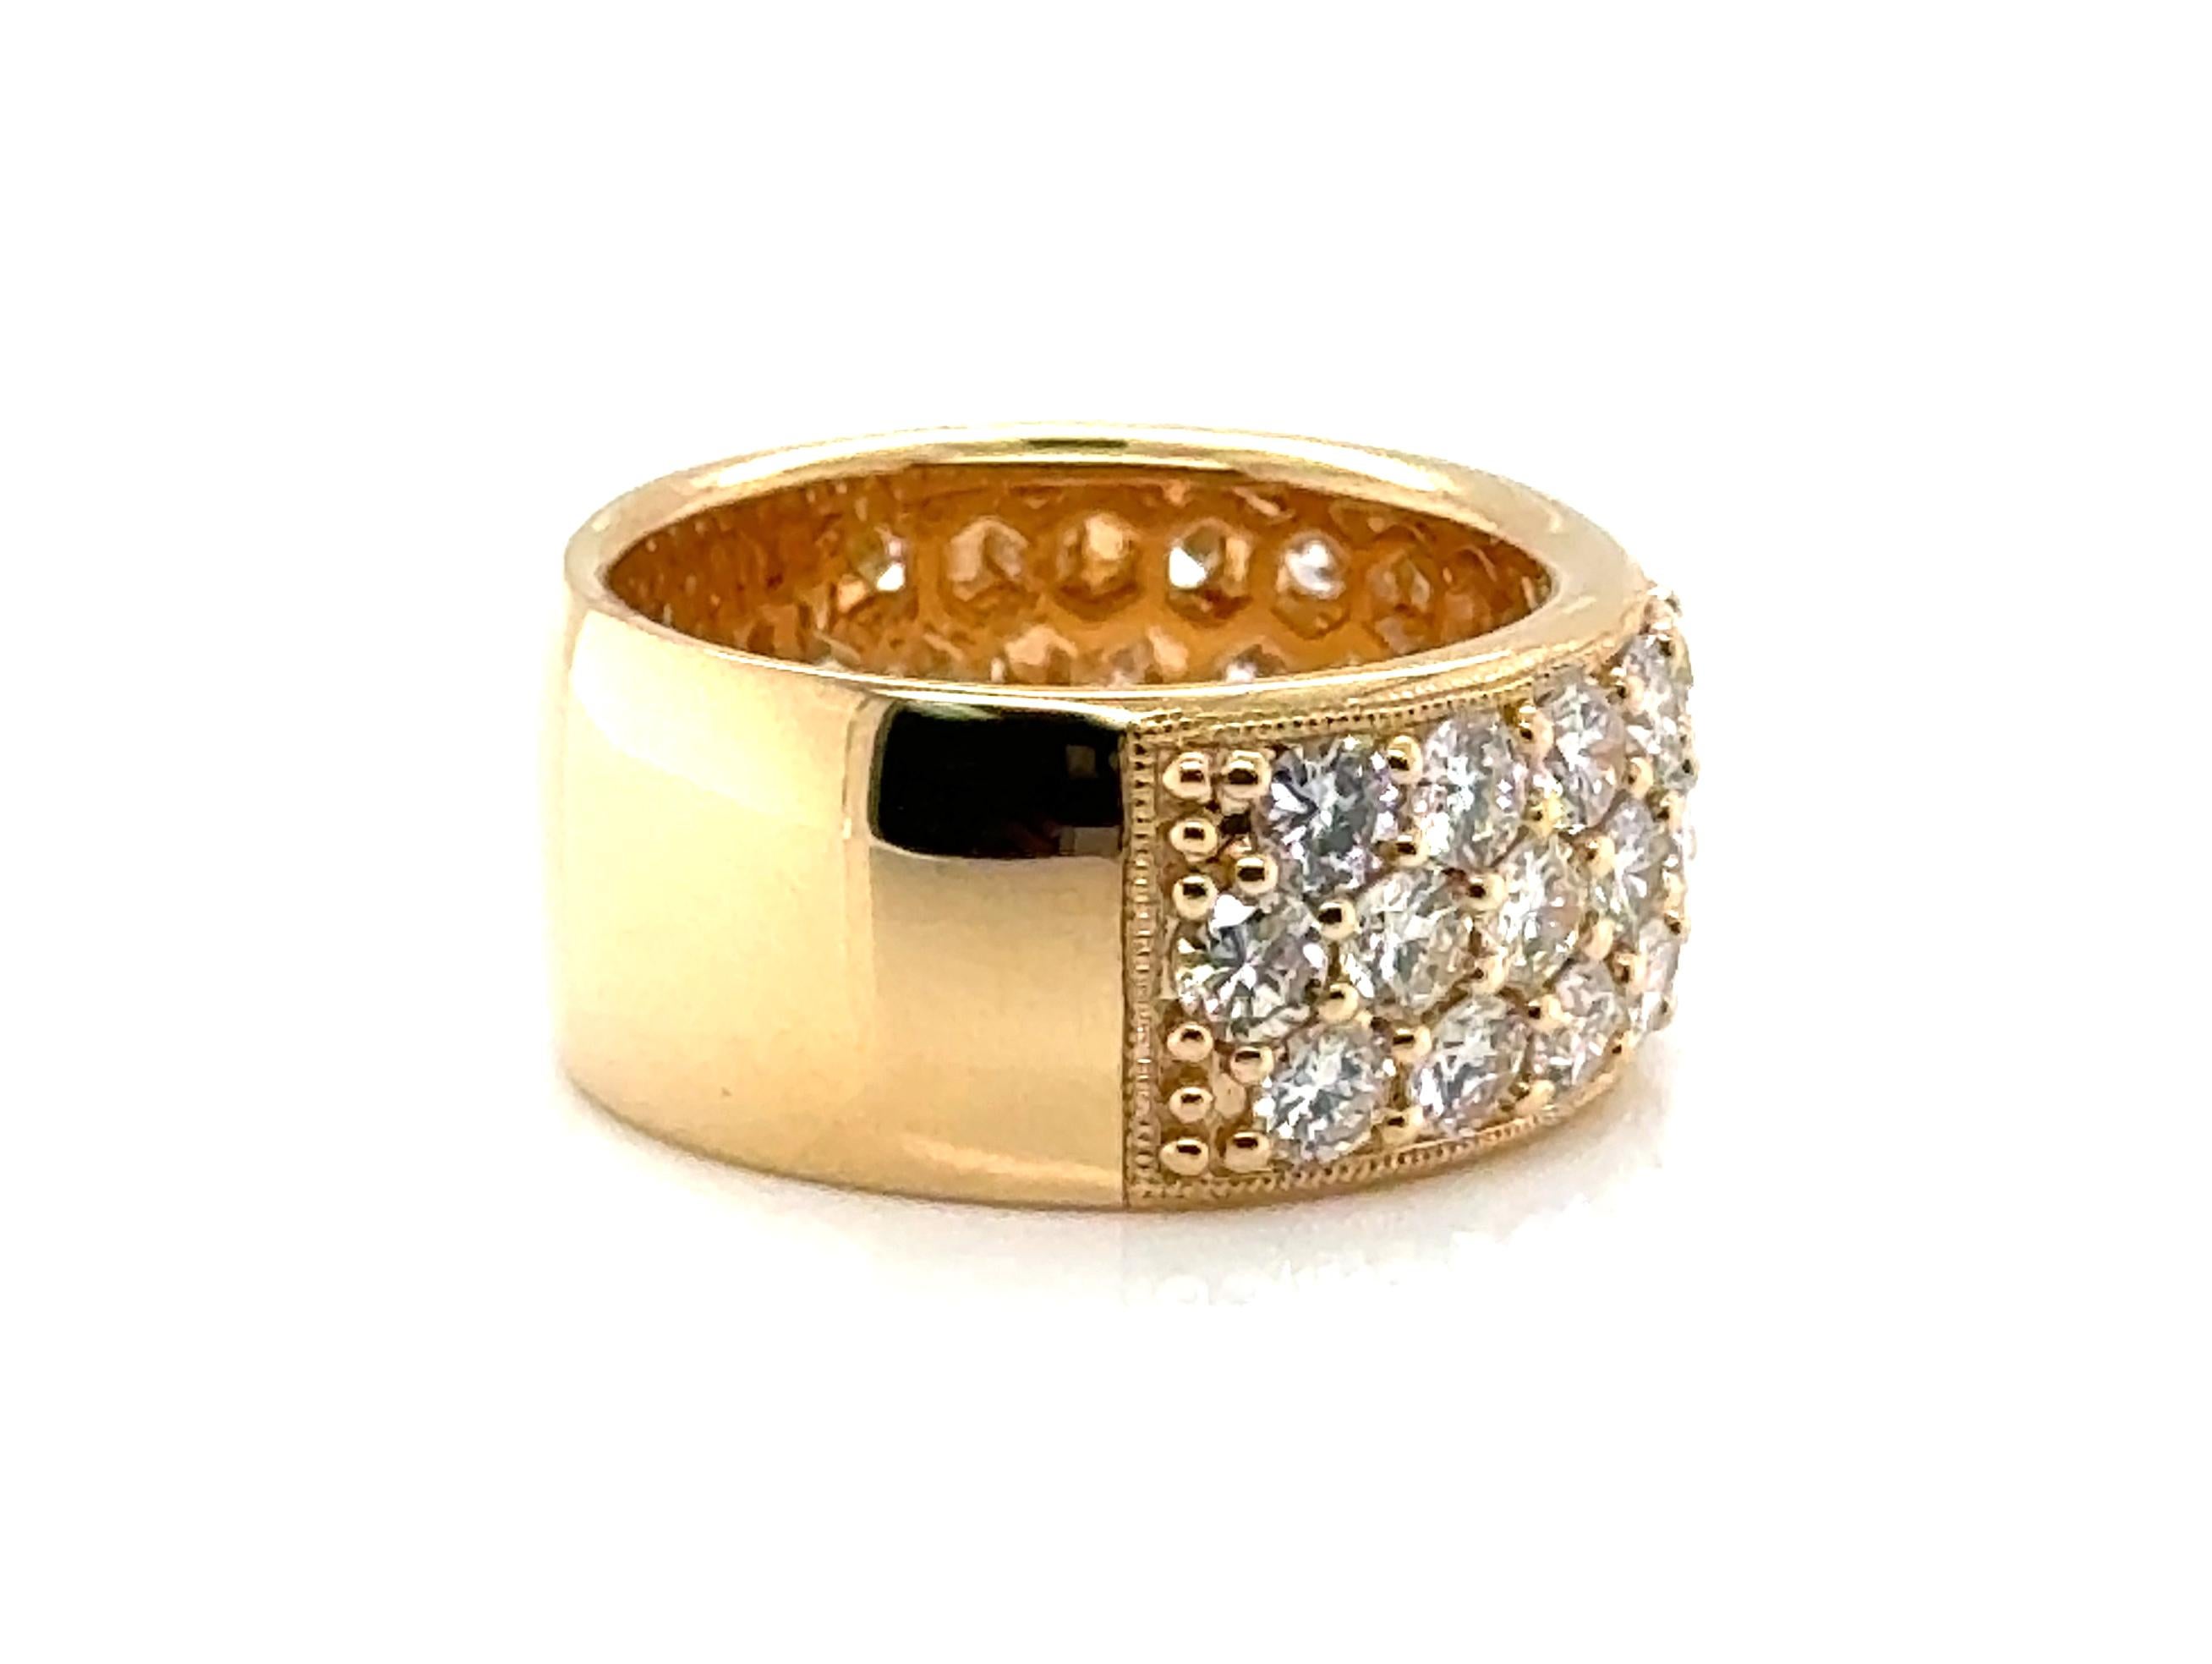 Anniversary Ring 3 Row Diamond Band 3.05ct 18K Yellow Gold Brand New Size 6.25


Exquisite 3 Row Diamond Band Design 

Timeless Brilliance of Round Cut Diamonds on Display

Miligrain Edging offers Flattering Look 

Wide Top and Wide Band 

Turn